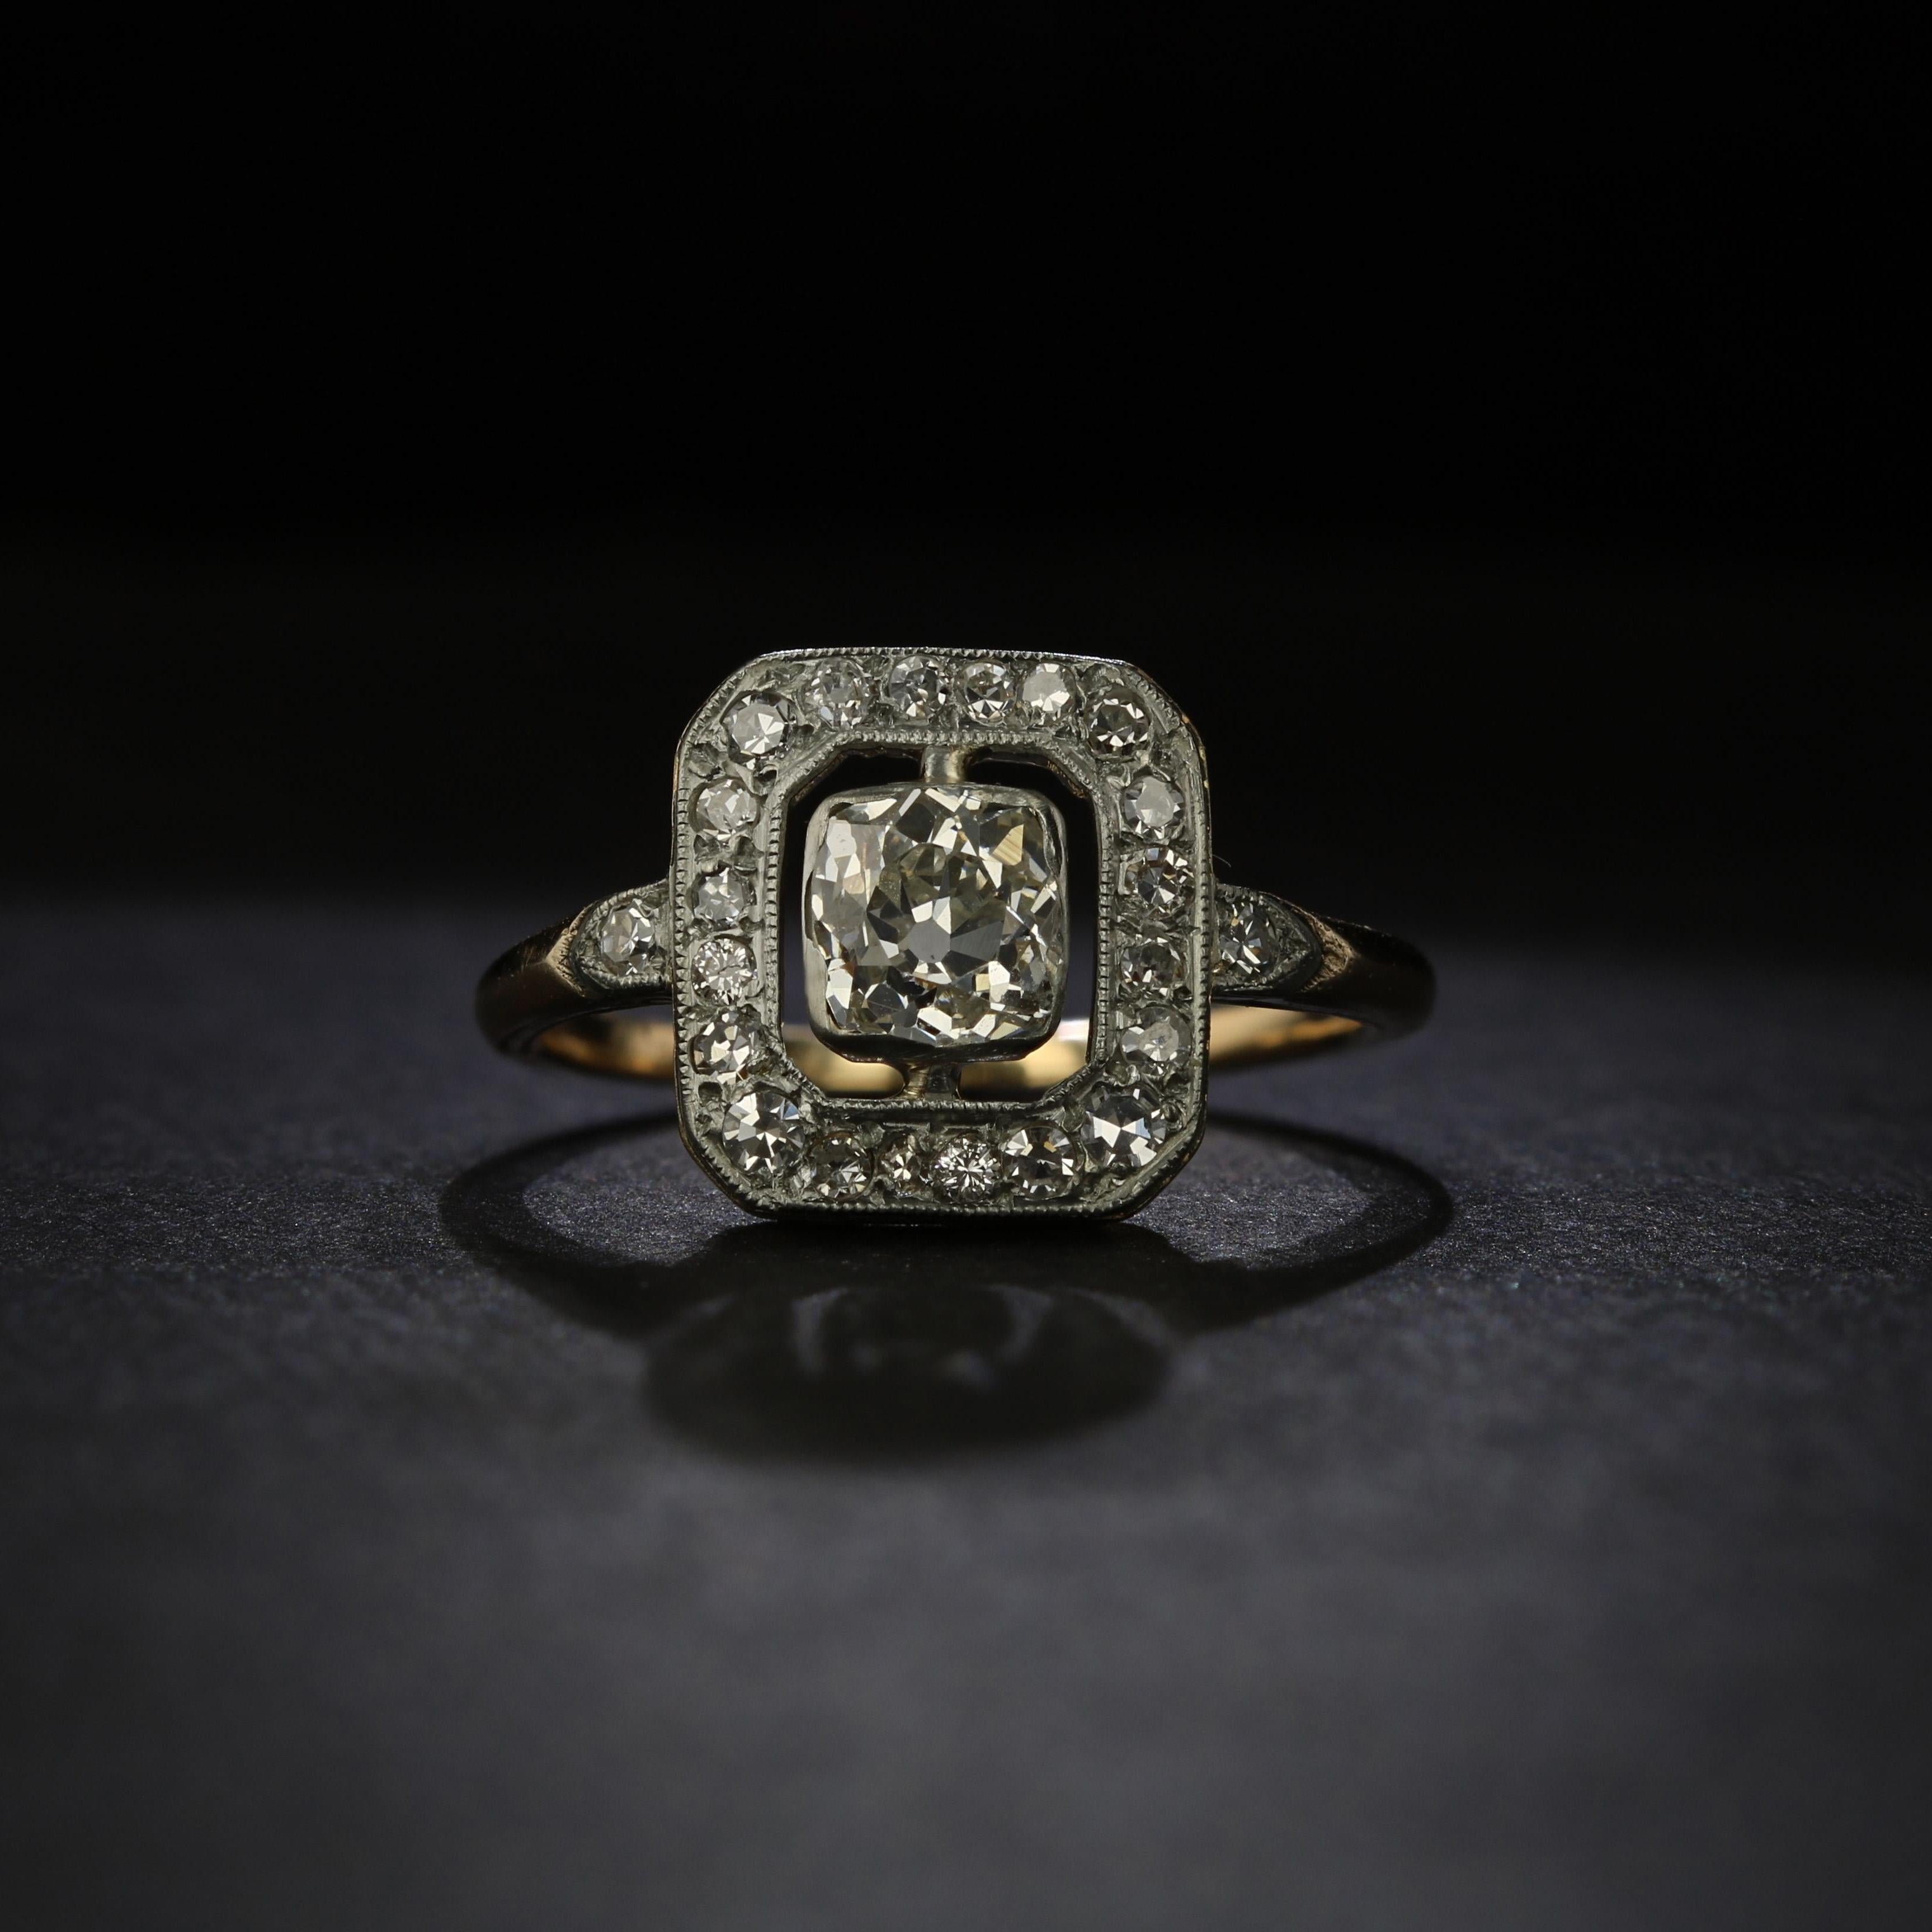 A striking piece from the Edwardian era, or the turn of the 20th century, this ring features a stunning 0.80 carat old mine cut diamond set preciously in a platinum bezel. Surrounding the diamond is an open and airy space that lets the beauty of the